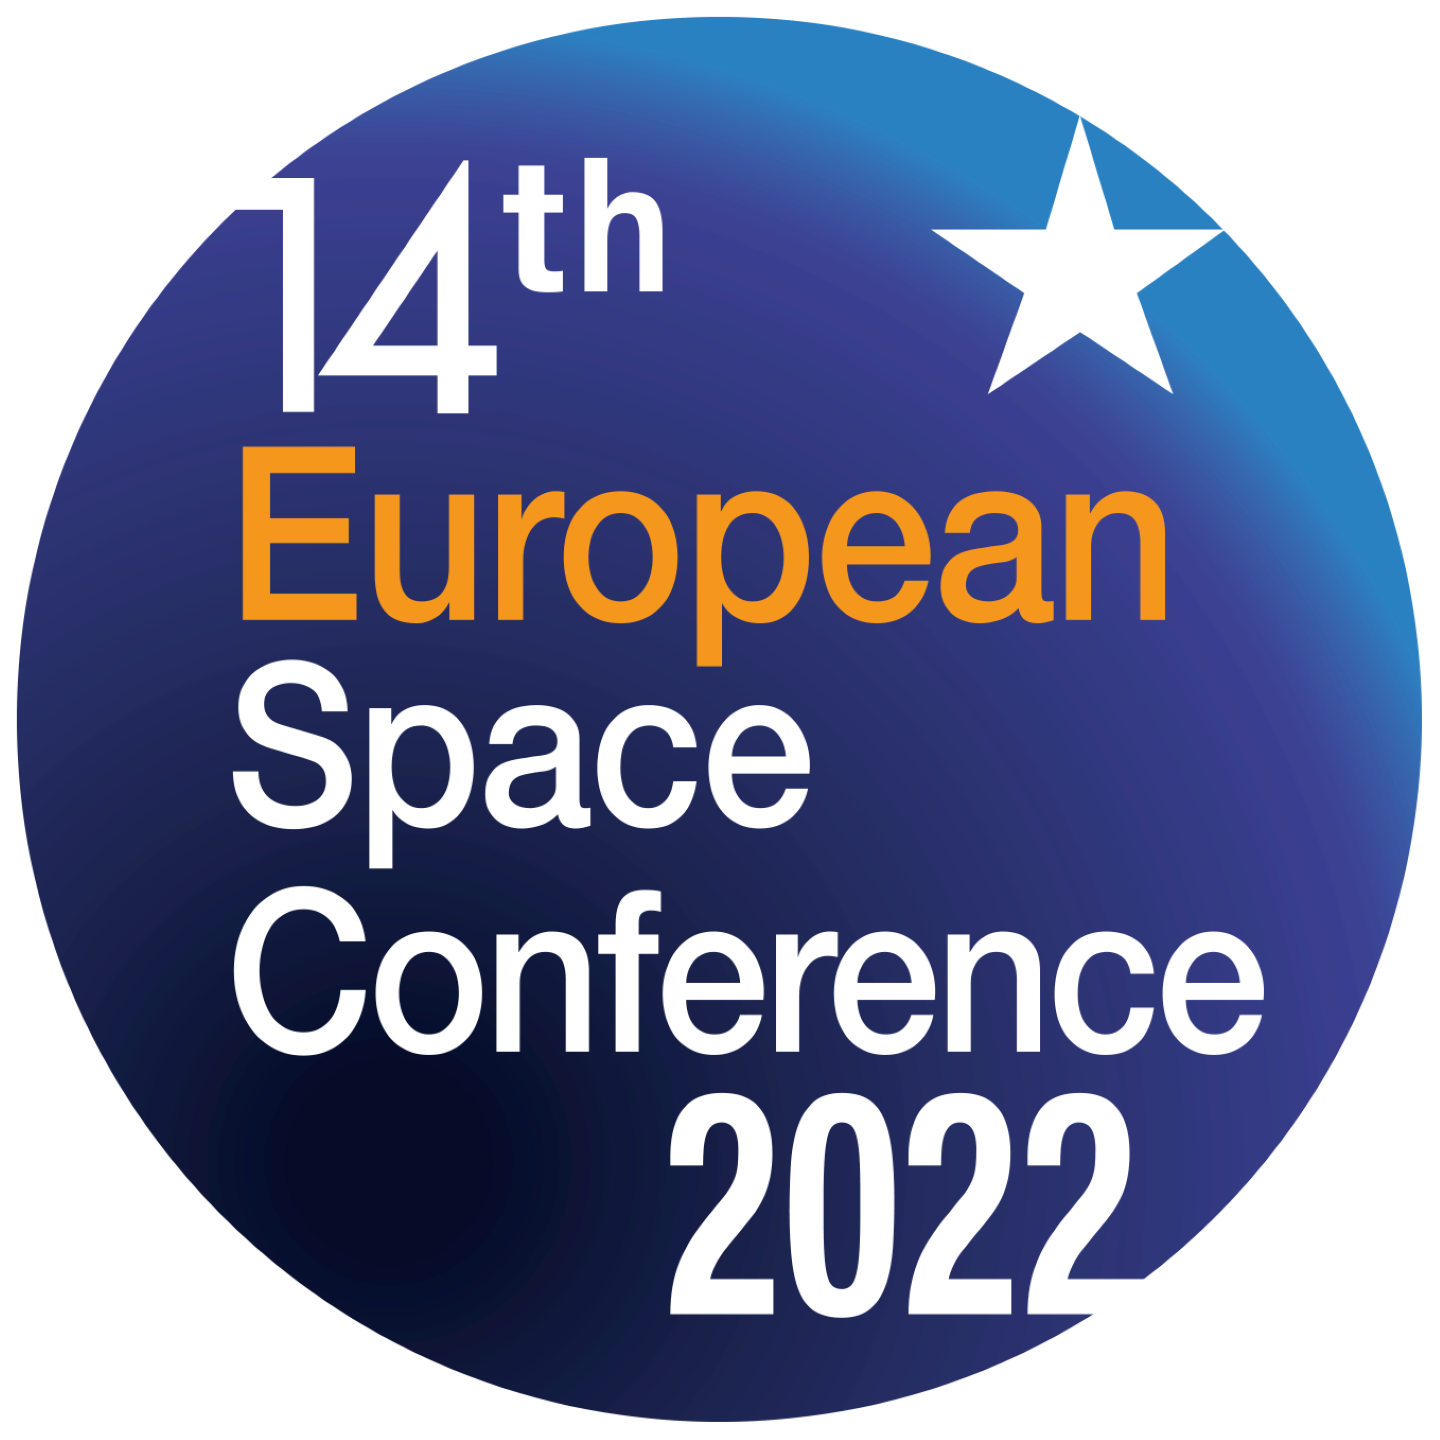 14th European Space Conference 2022